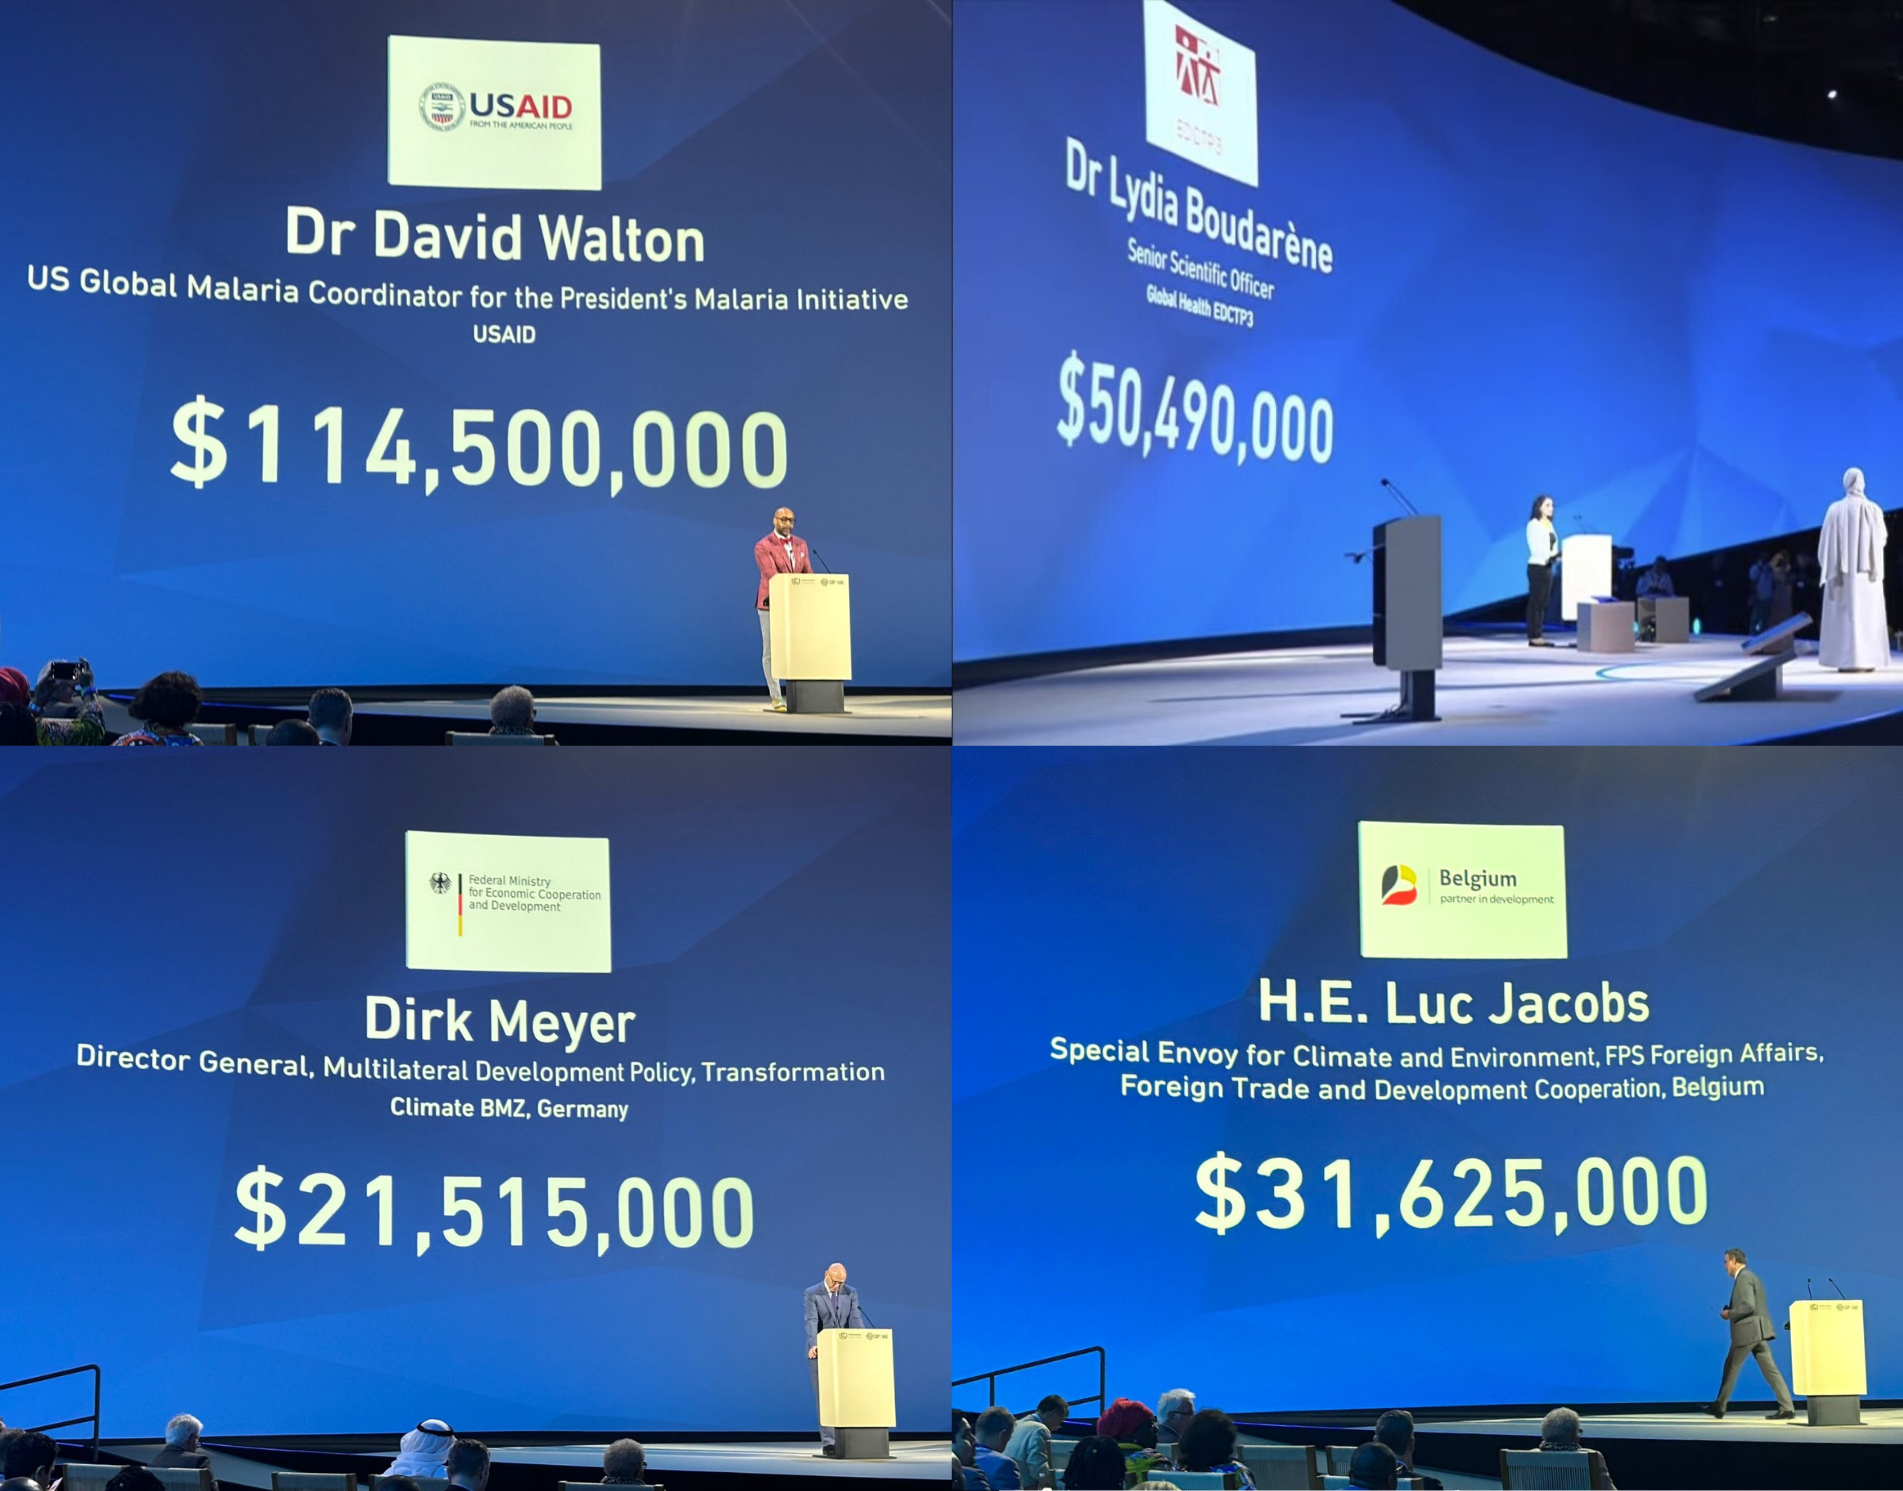 A collage of four commitments on stage at RLMF - Dr David Walton, USAID $114,500,000; Dr Lydia Boudarene, Global Health EDCTP3 $50,490,000; Dirk Meyer, BMZ, Germany $21,515,000; HE. Luc Jacobs, FTDC Belgium $31,625,000